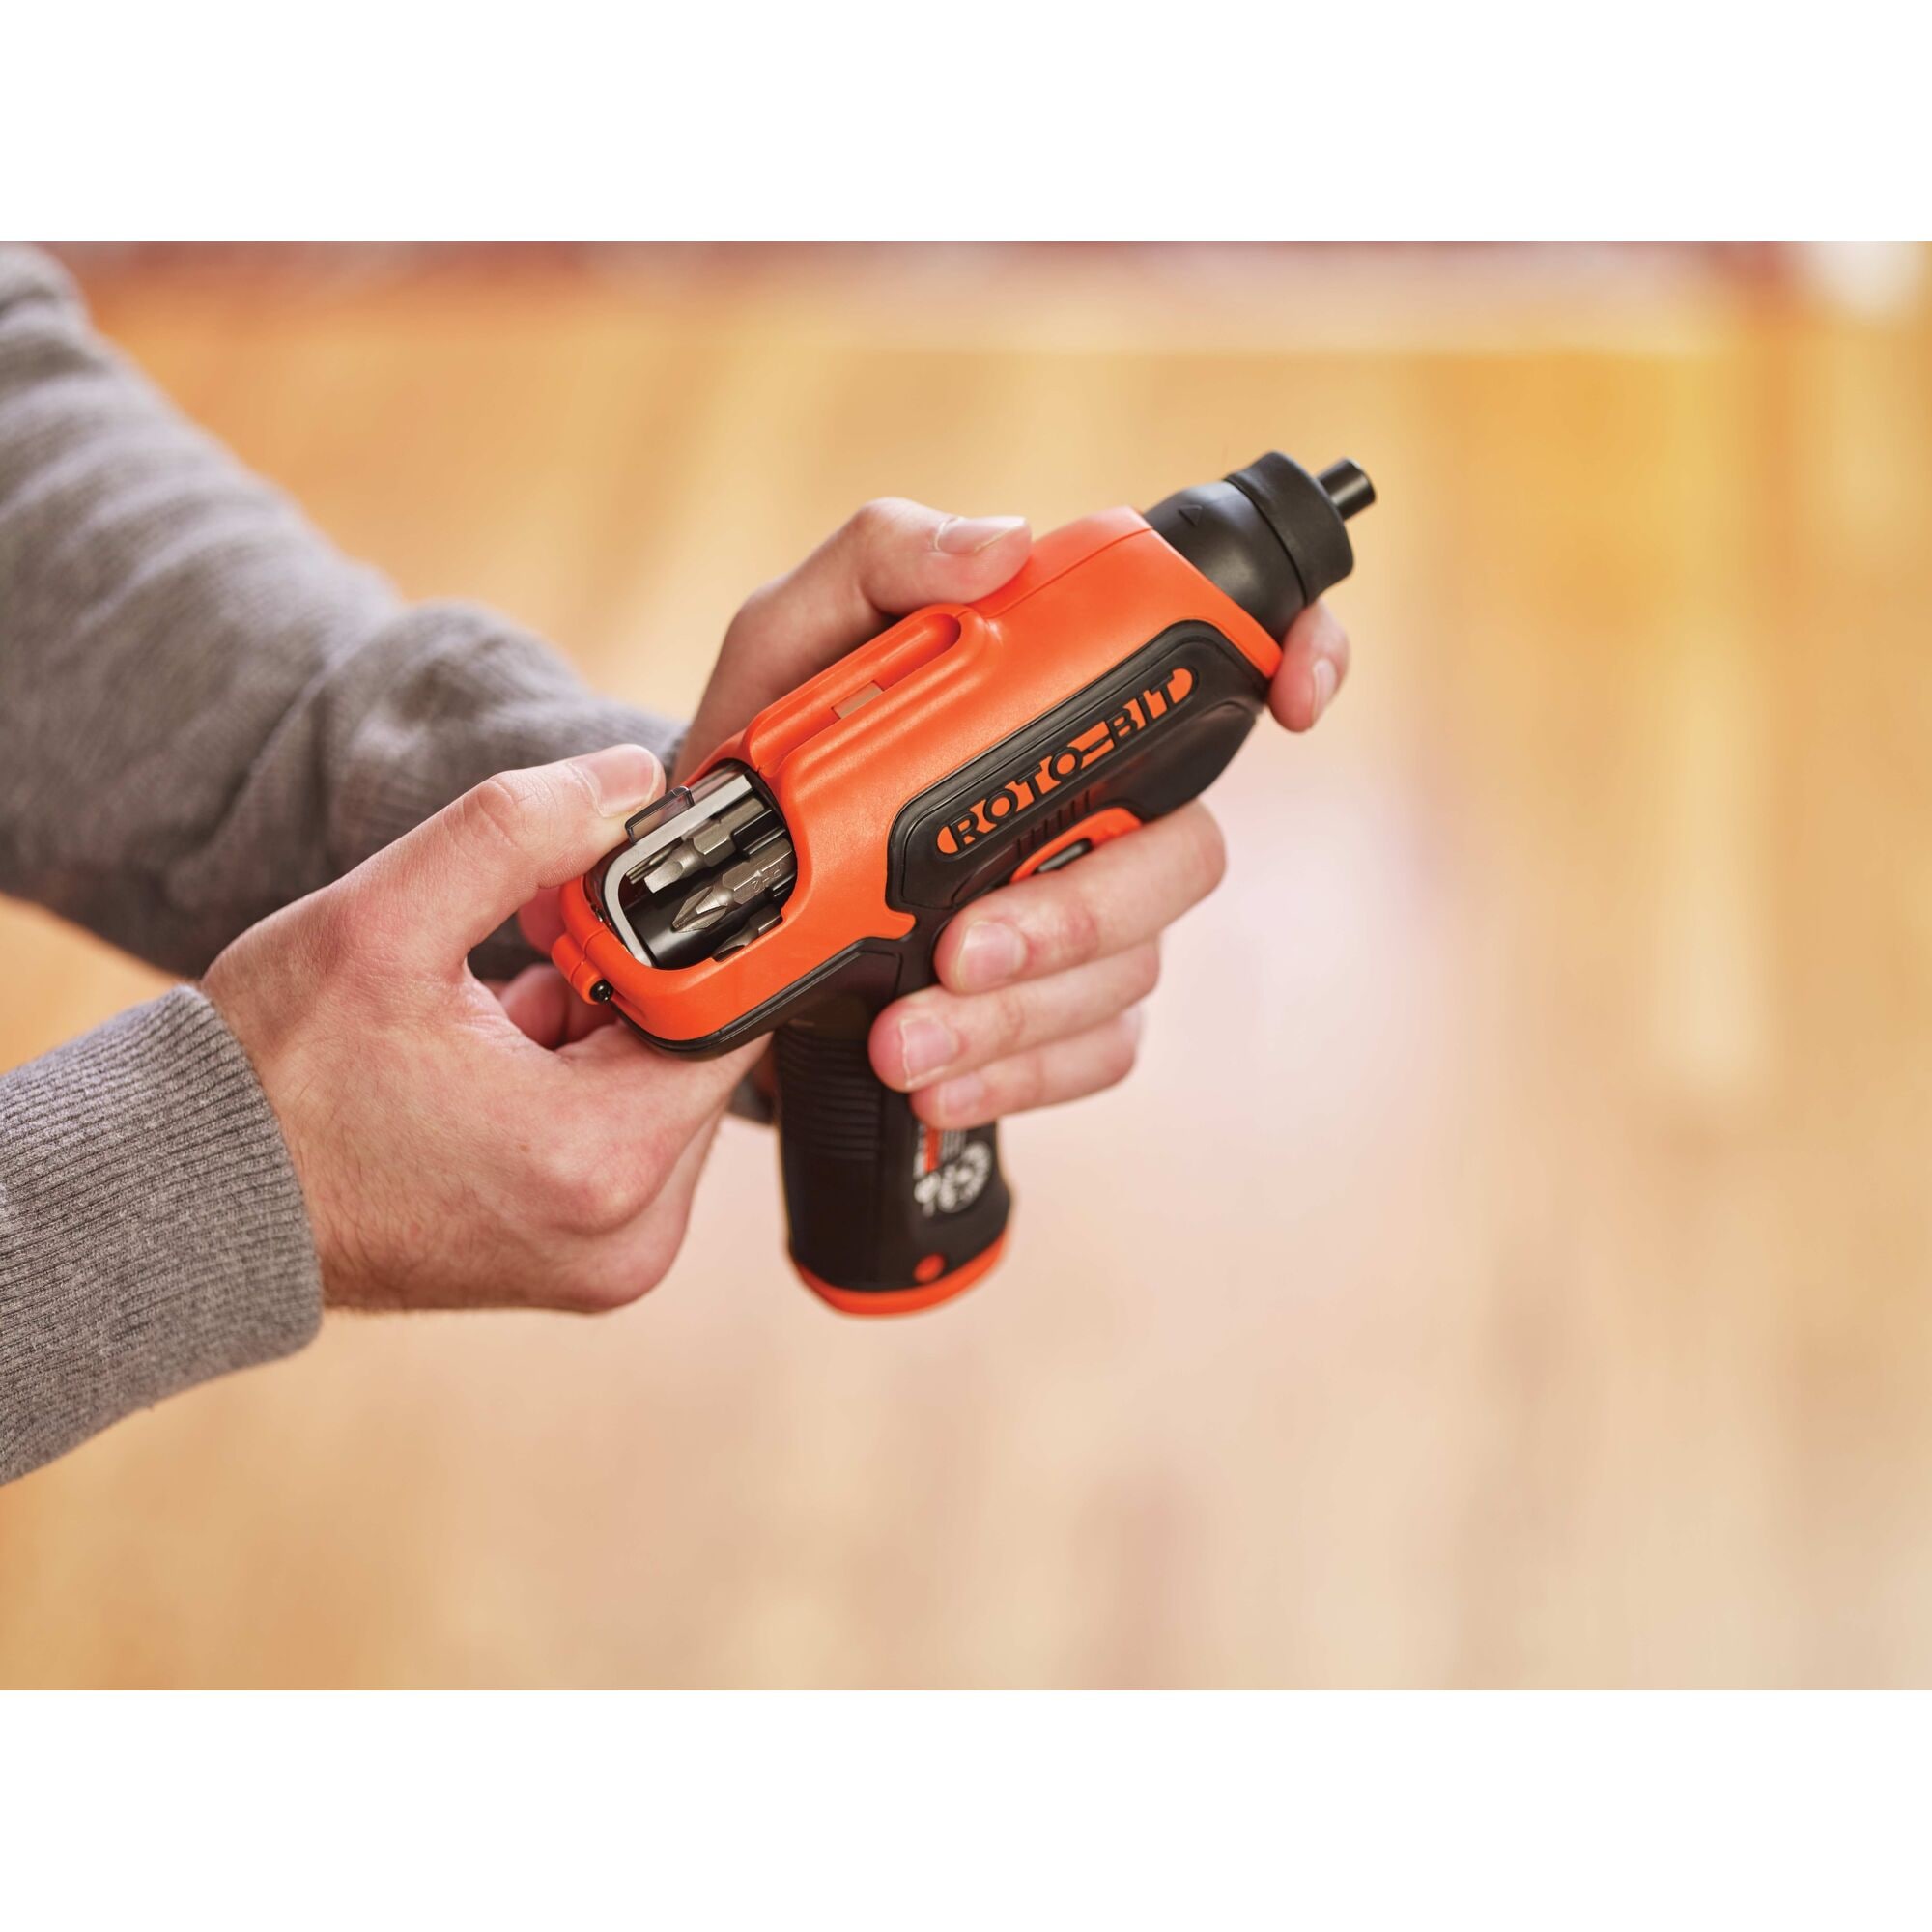 A Black And DECKER Roto Bit Hand Drill. for Sale in Raytown, MO